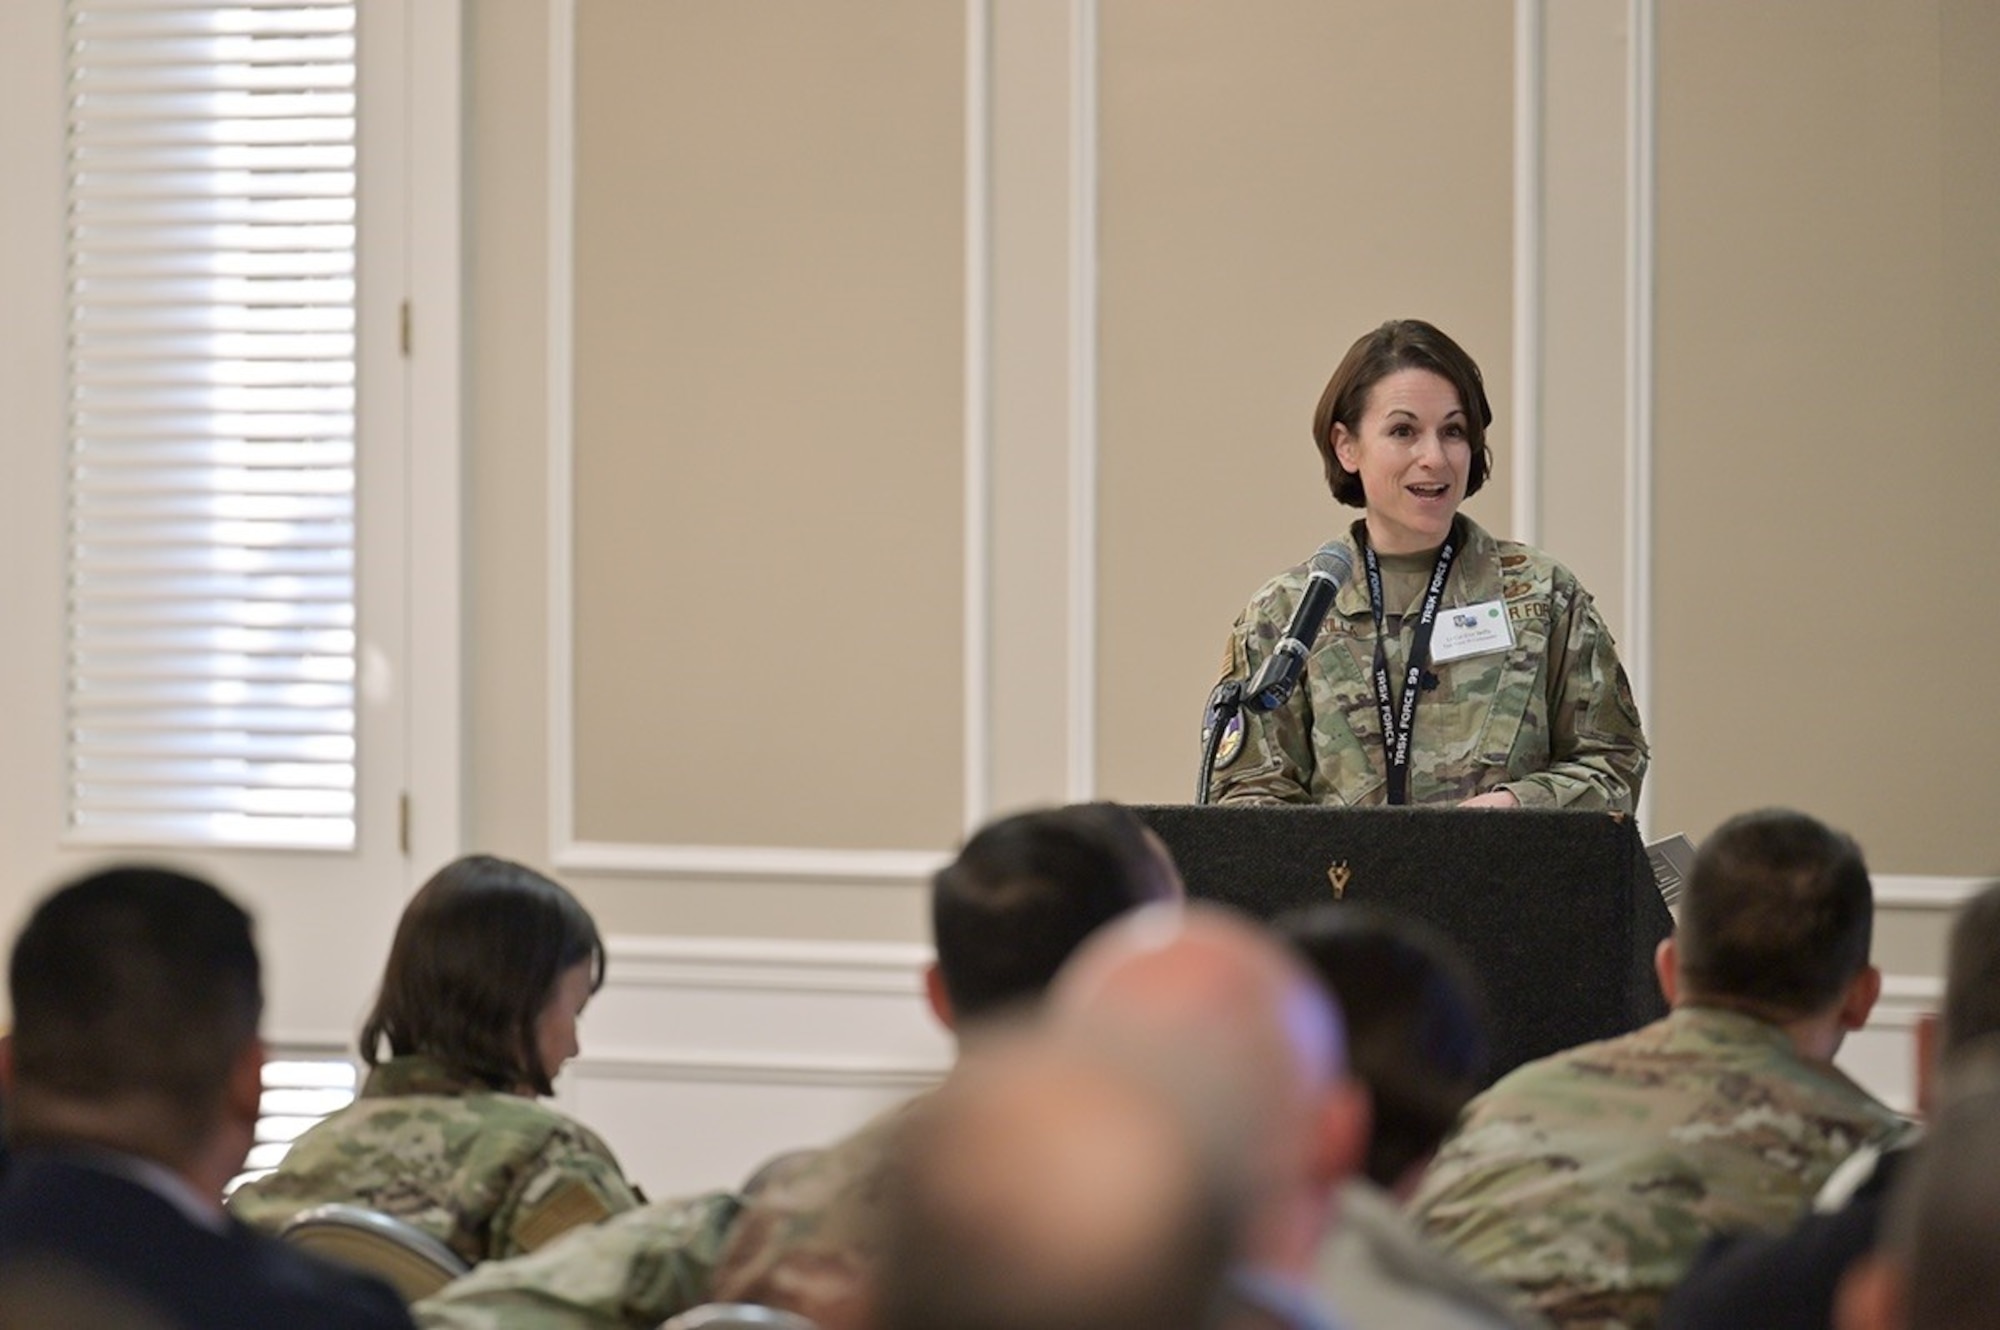 U.S. Air Force Lt. Col. Erin Brilla, Task Force 99 commander, provides an overview of Innovation Day at Shaw Air Force Base, S.C., Feb. 15, 2023. This was the first Innovation Day hosted by Ninth Air Force (Air Forces Central).  More than 70 industry partners and 230 participants attended the event designed to connect the organization with solutions to problem sets in their 21-country area of responsibility.